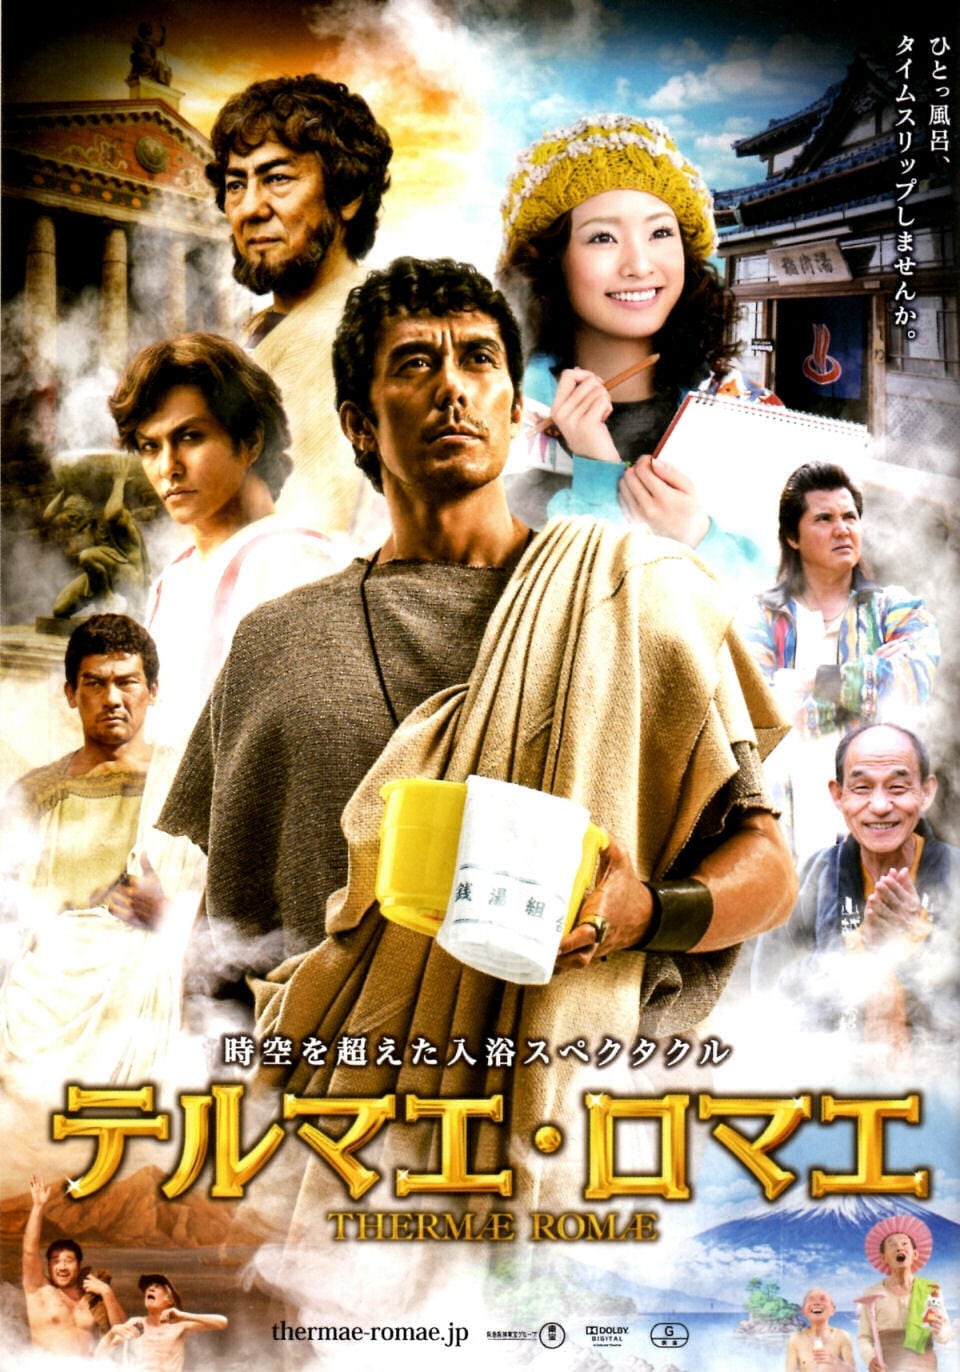 Thermae Romae - VOSTFR HDLight 1080p